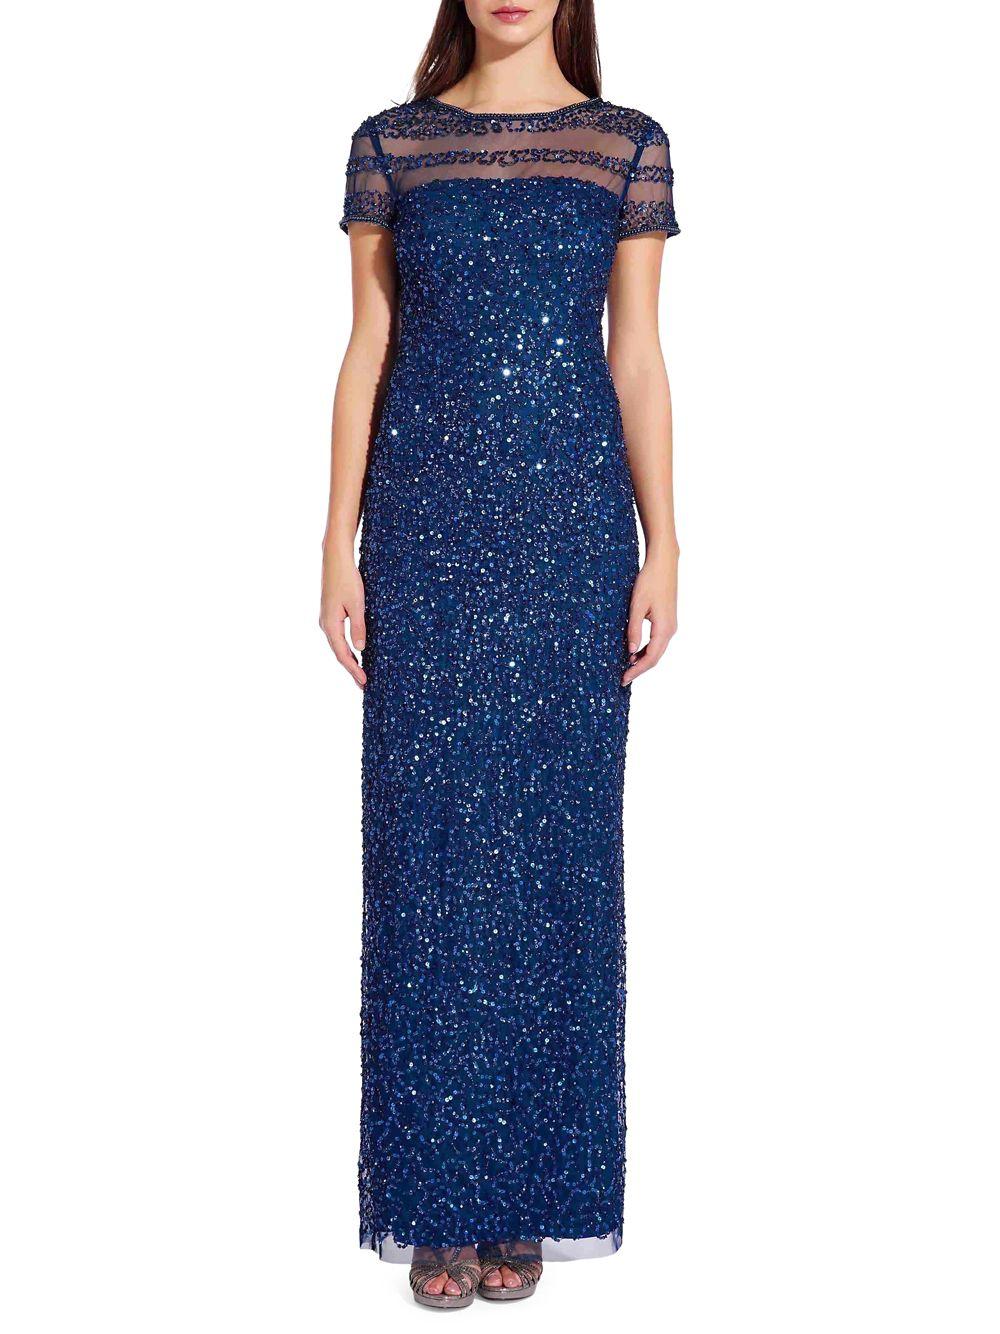 Adrianna Papell Beaded Column Dress in Blue - Lyst